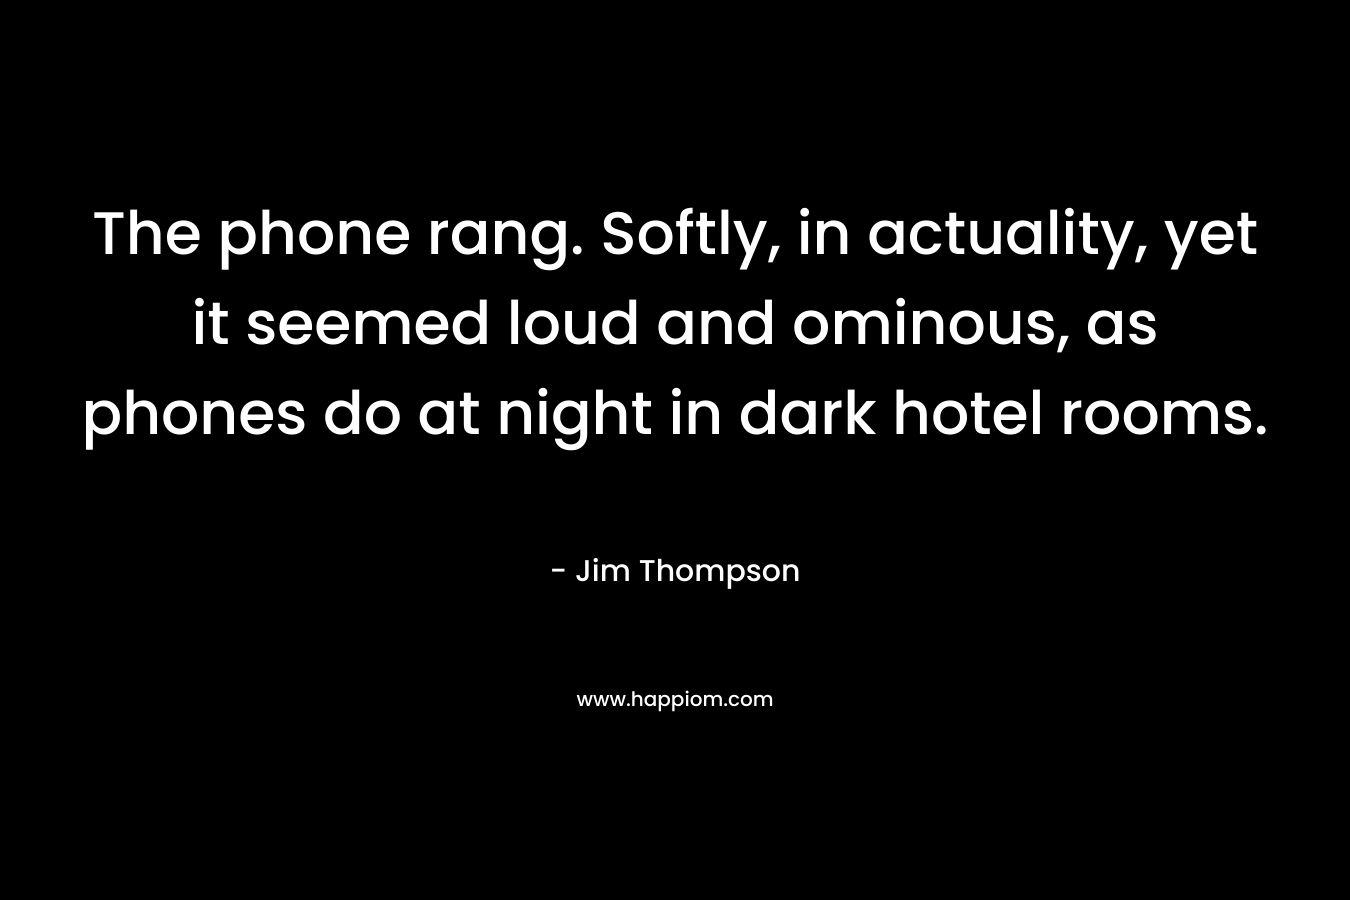 The phone rang. Softly, in actuality, yet it seemed loud and ominous, as phones do at night in dark hotel rooms. – Jim Thompson